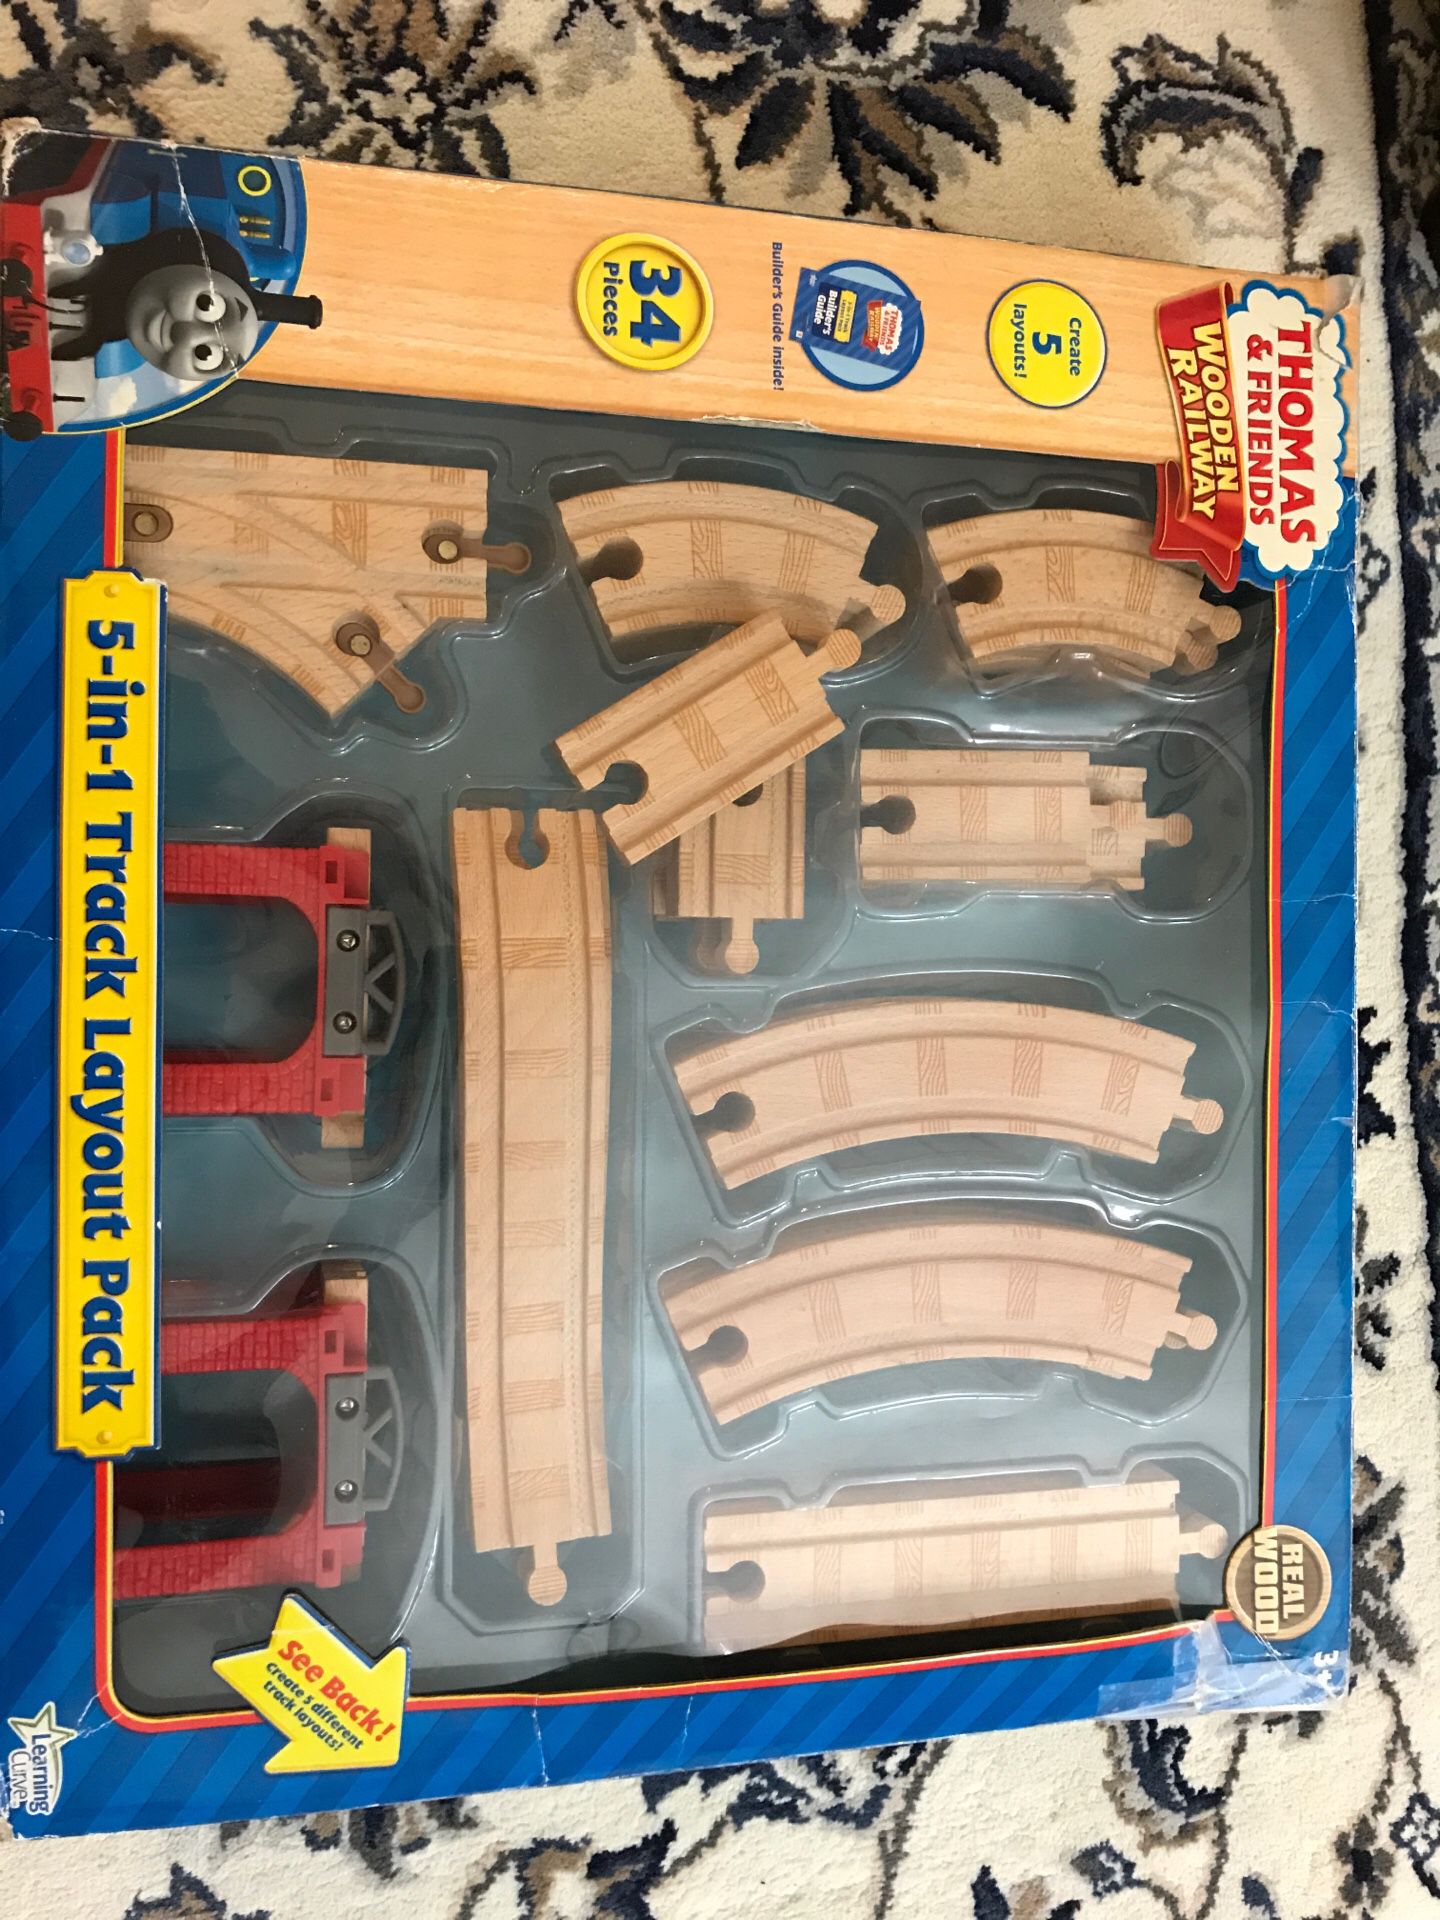 Thomas&friends wooden railroad, 5 in 1 track layout pack. 35 pieces, used but great condition.